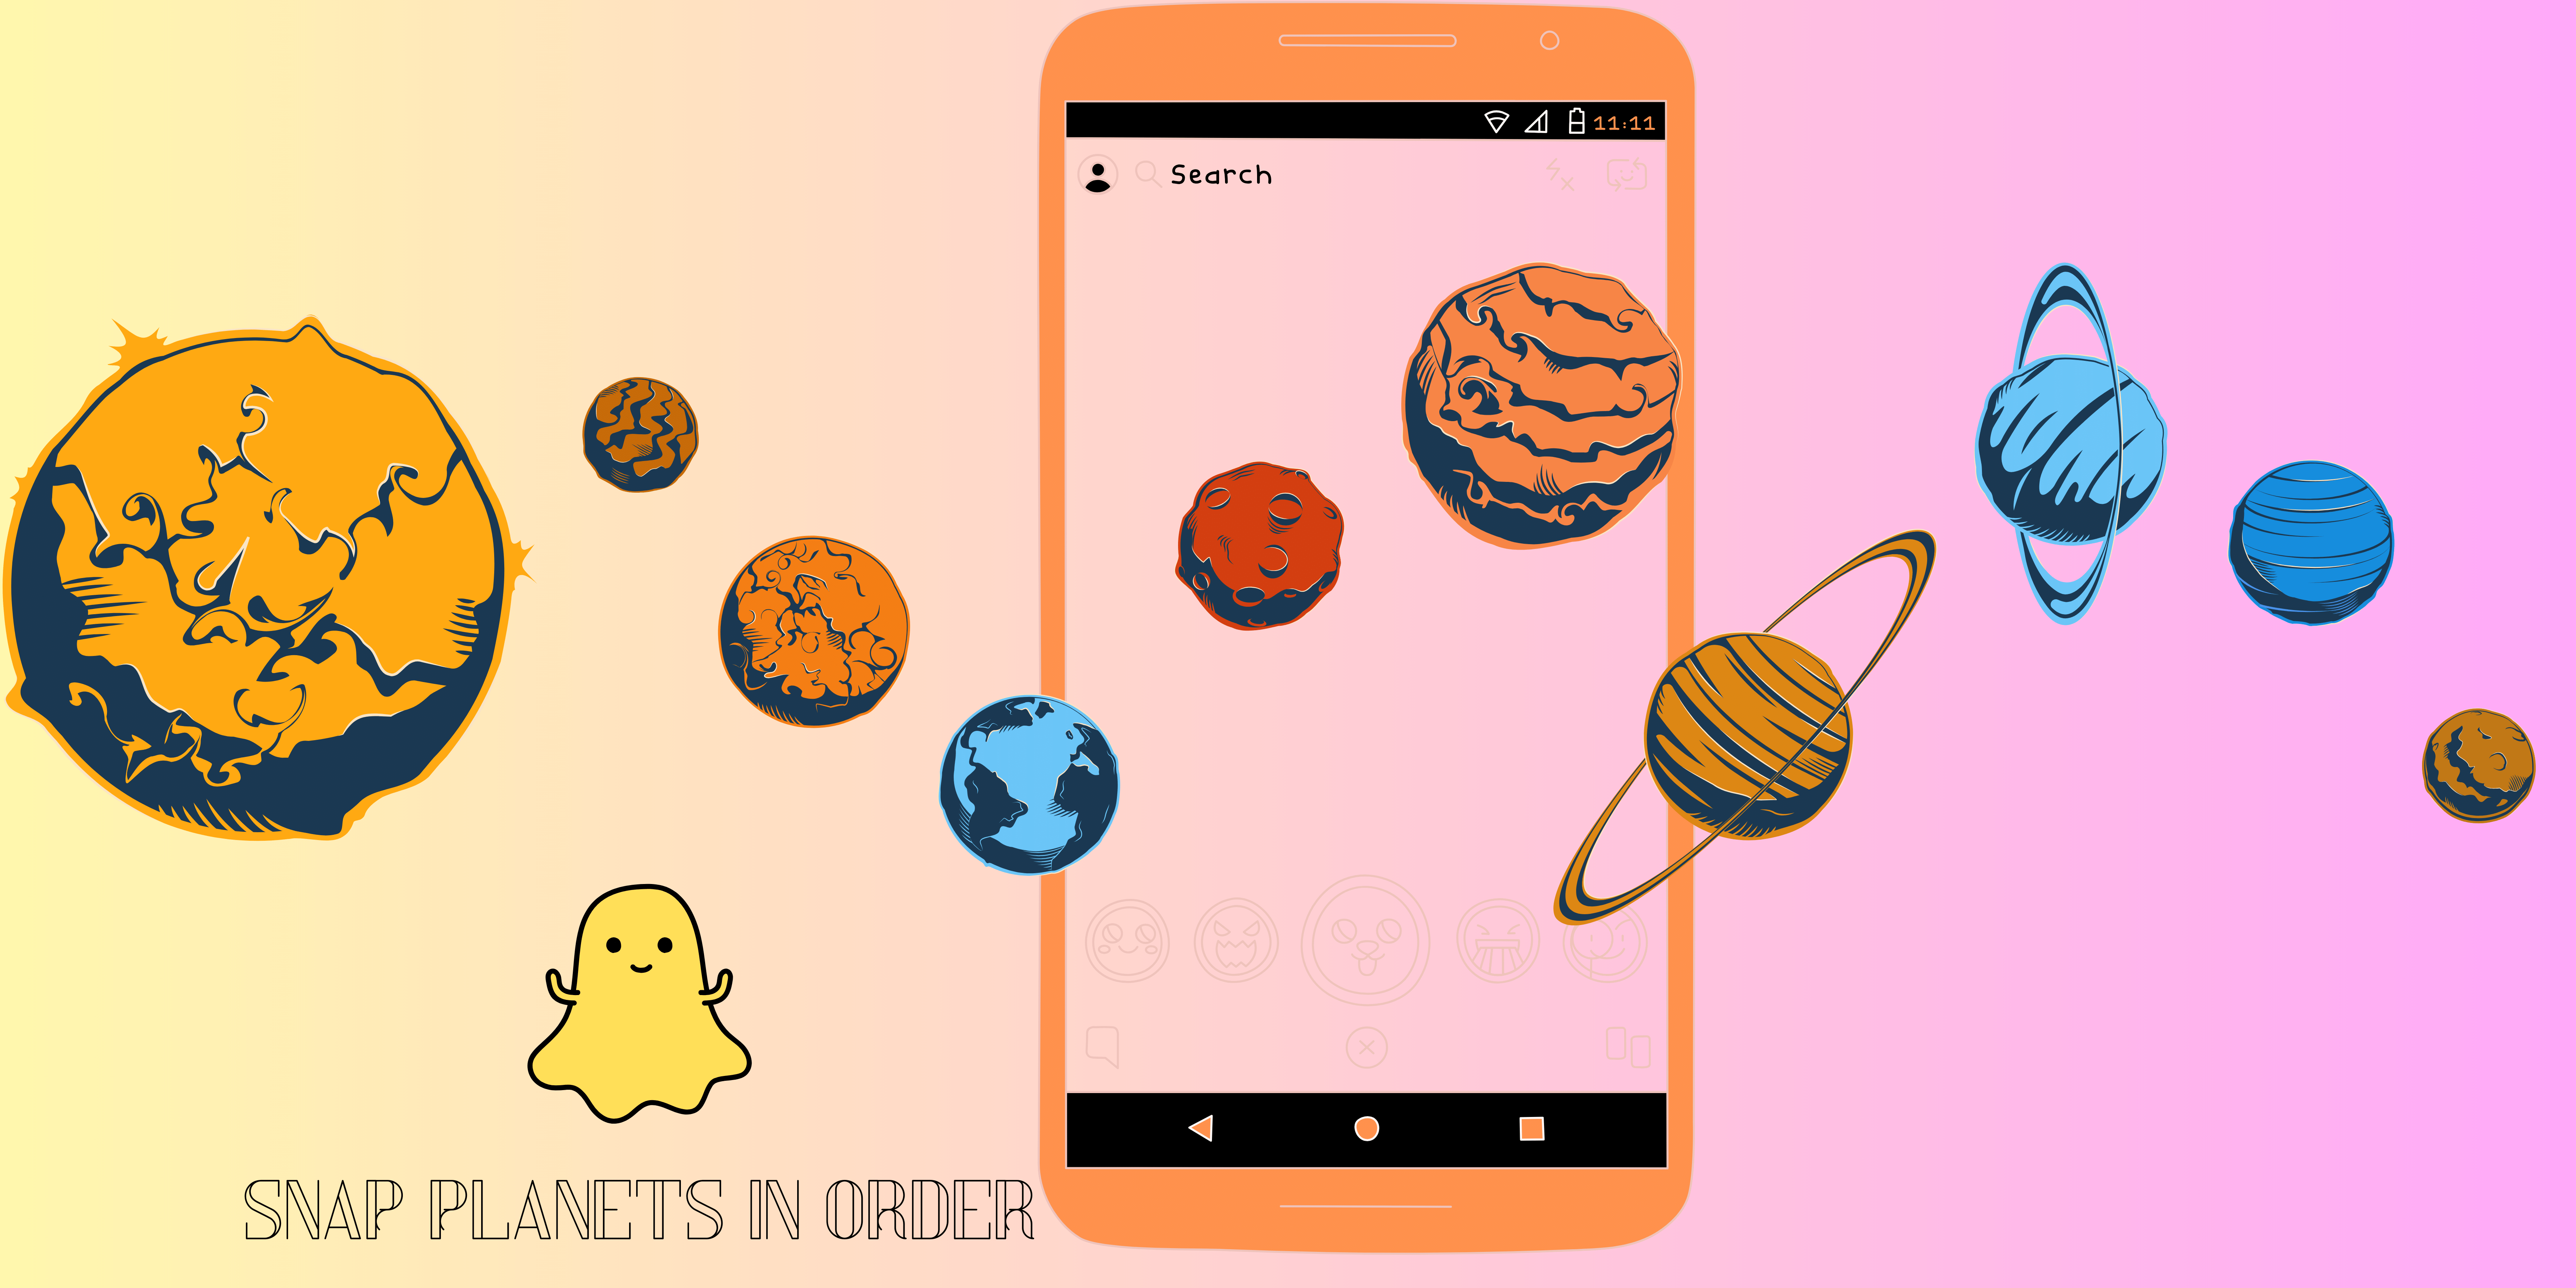 Snap Planets in order